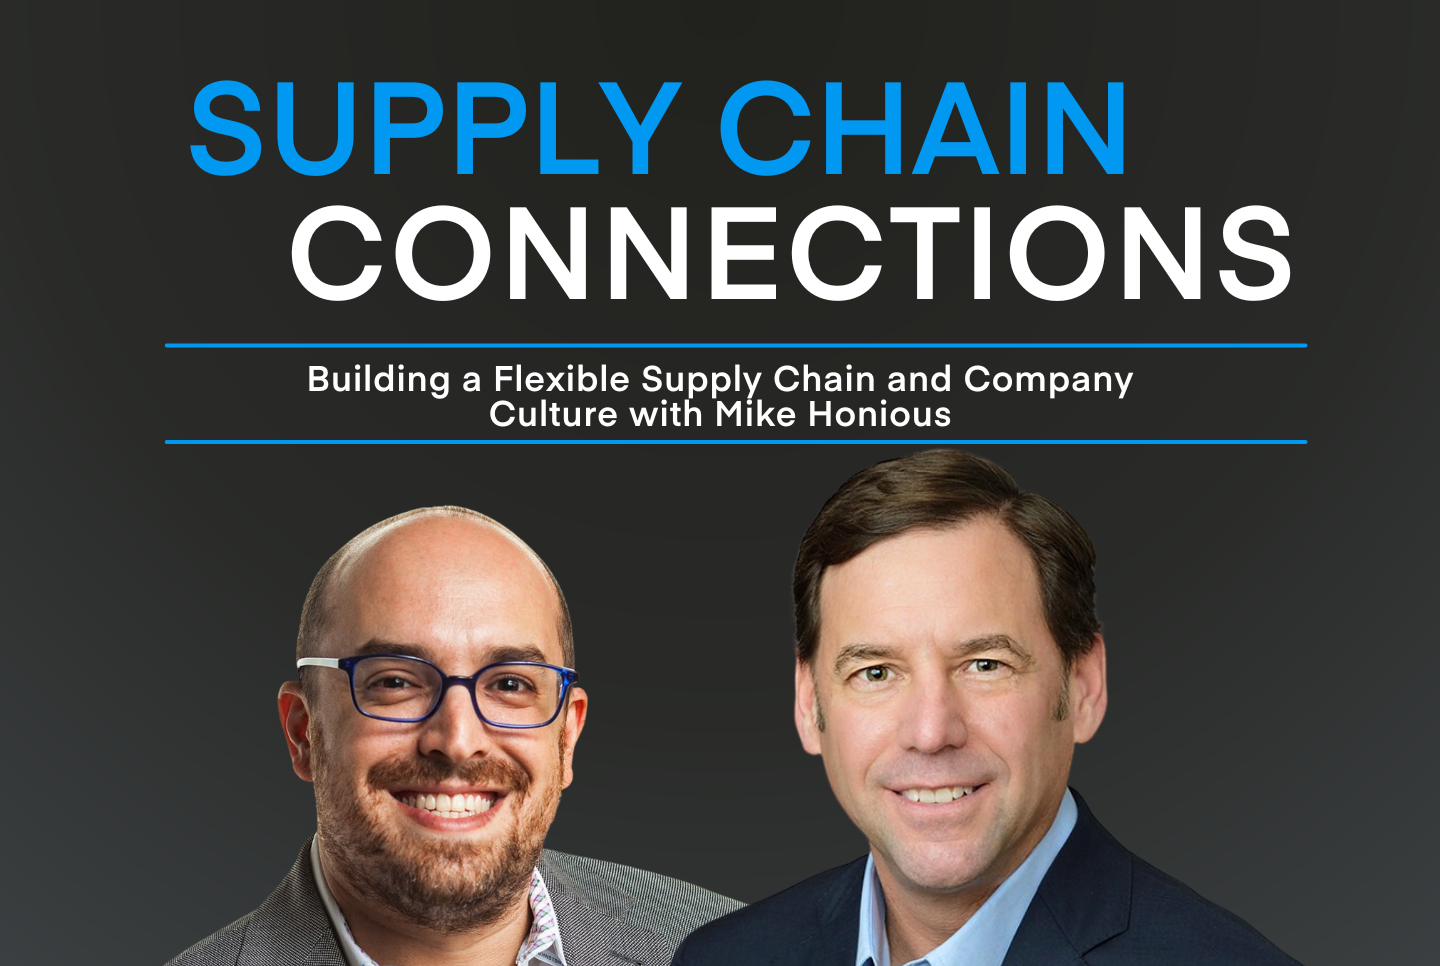 Building a Flexible Supply Chain and Company Culture with Mike Honious